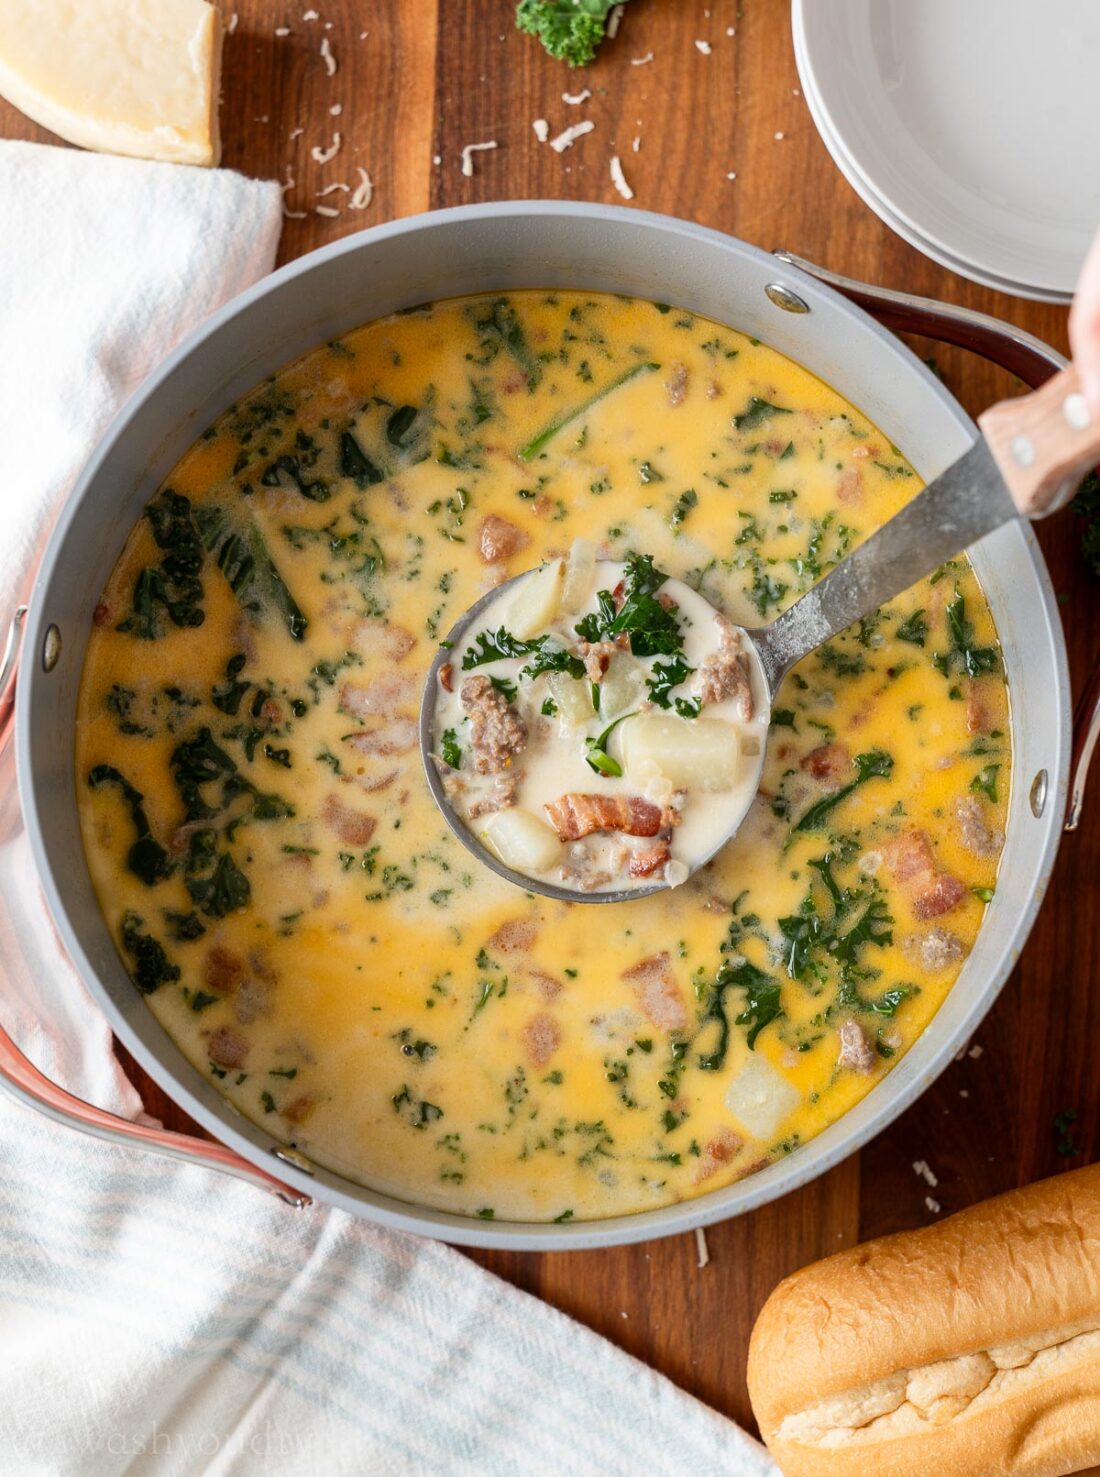 Pot of cooked zuppa toscana with ladle.